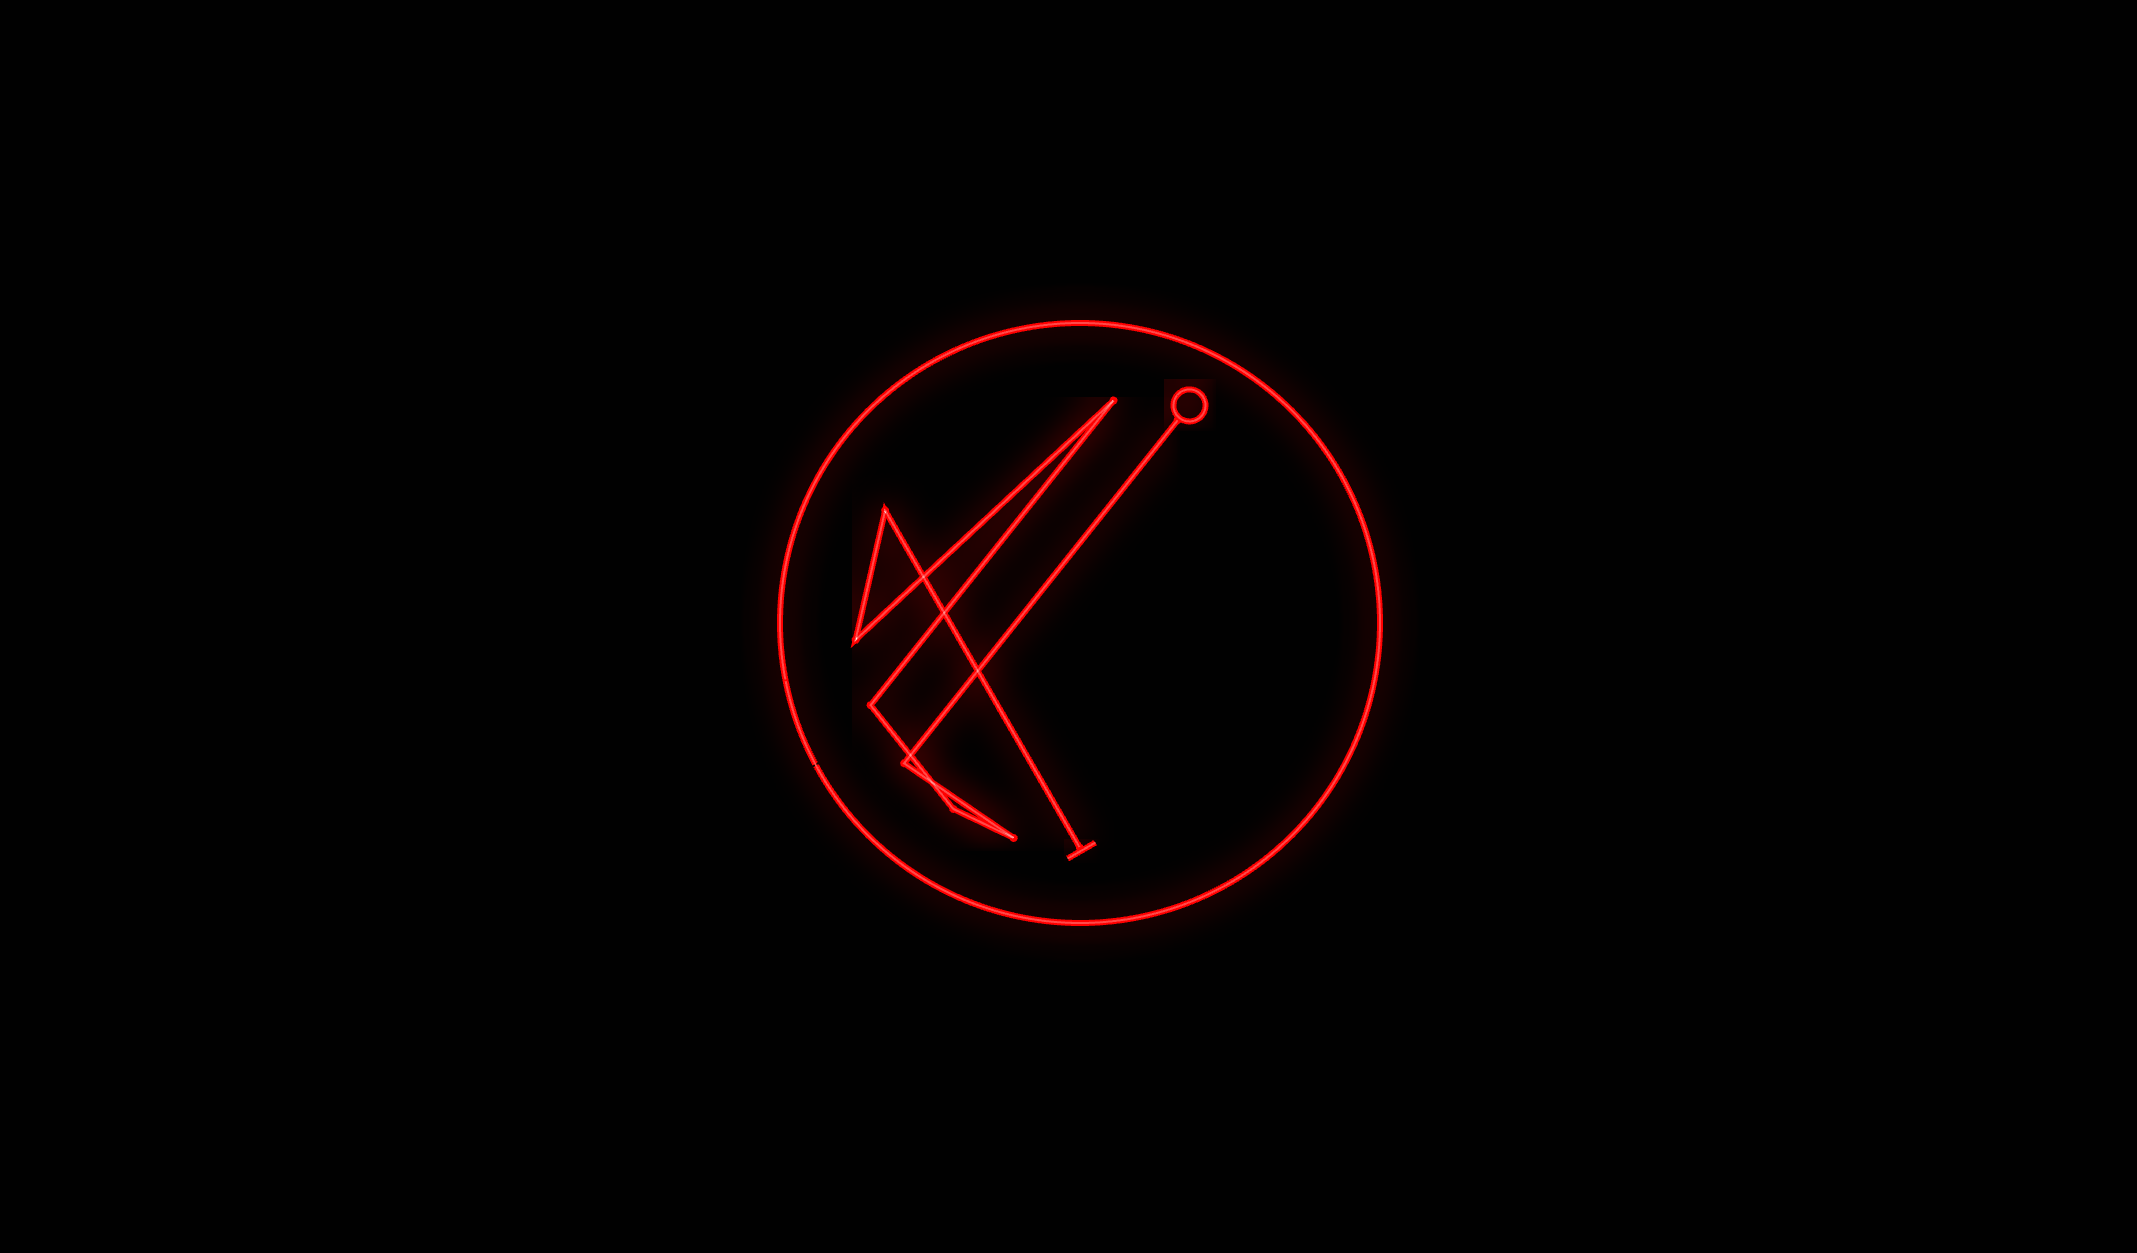 A red sigil inscribed within a circle on a black background